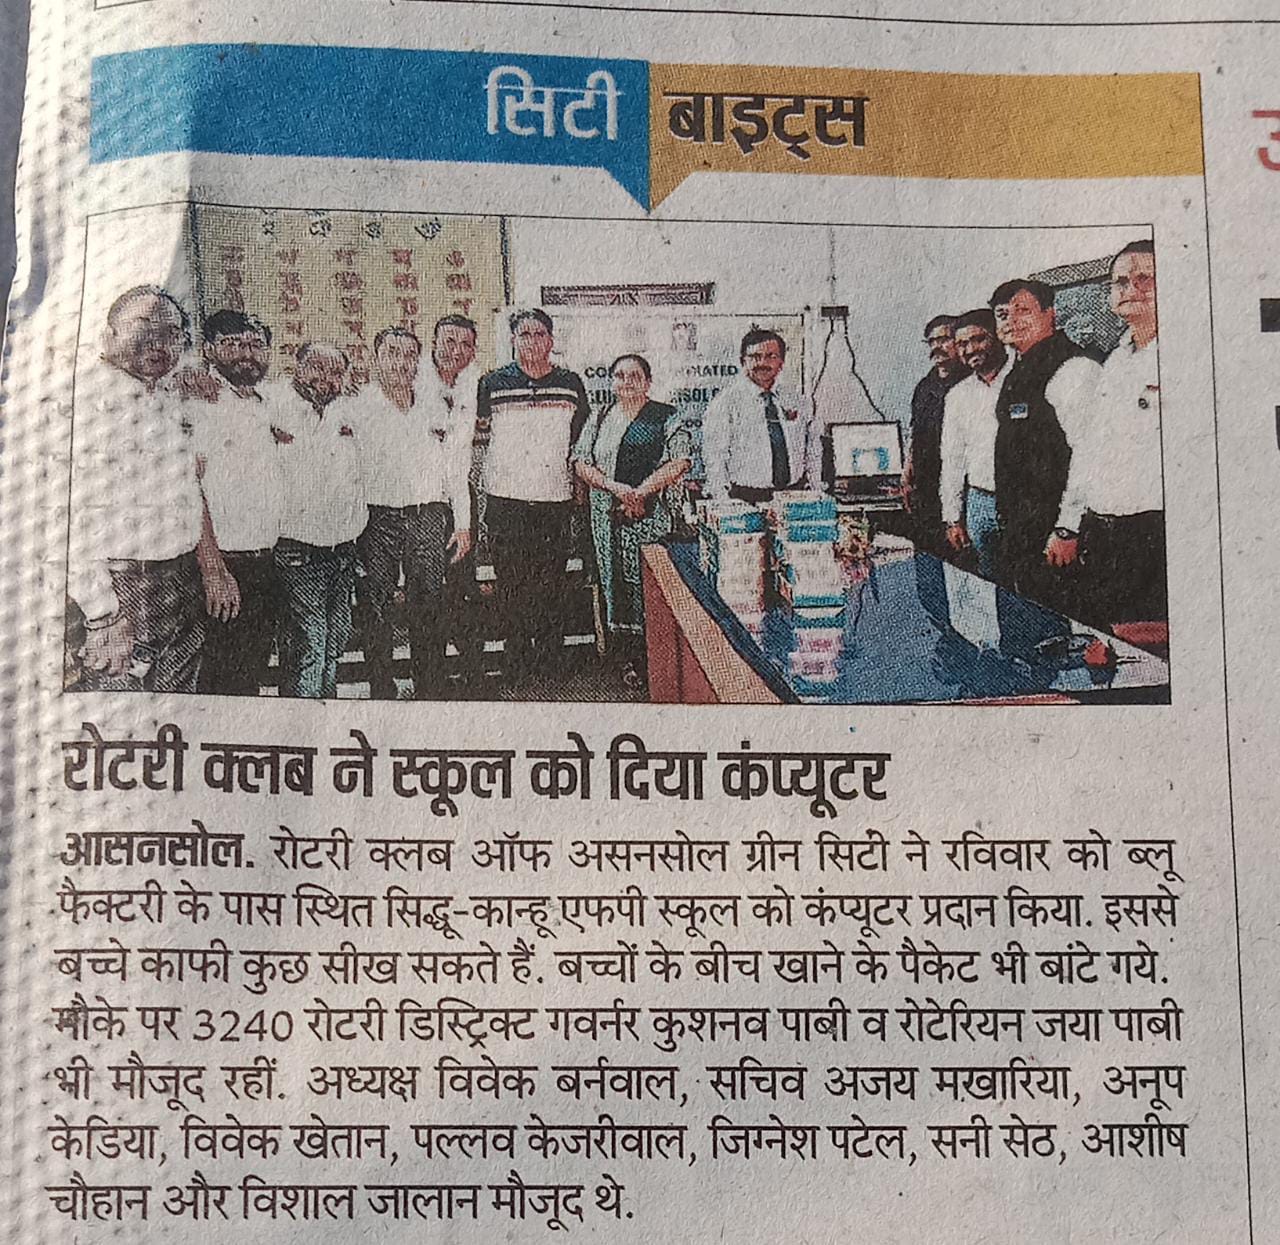 Media Coverage and enhancement of Public Image of Rotary